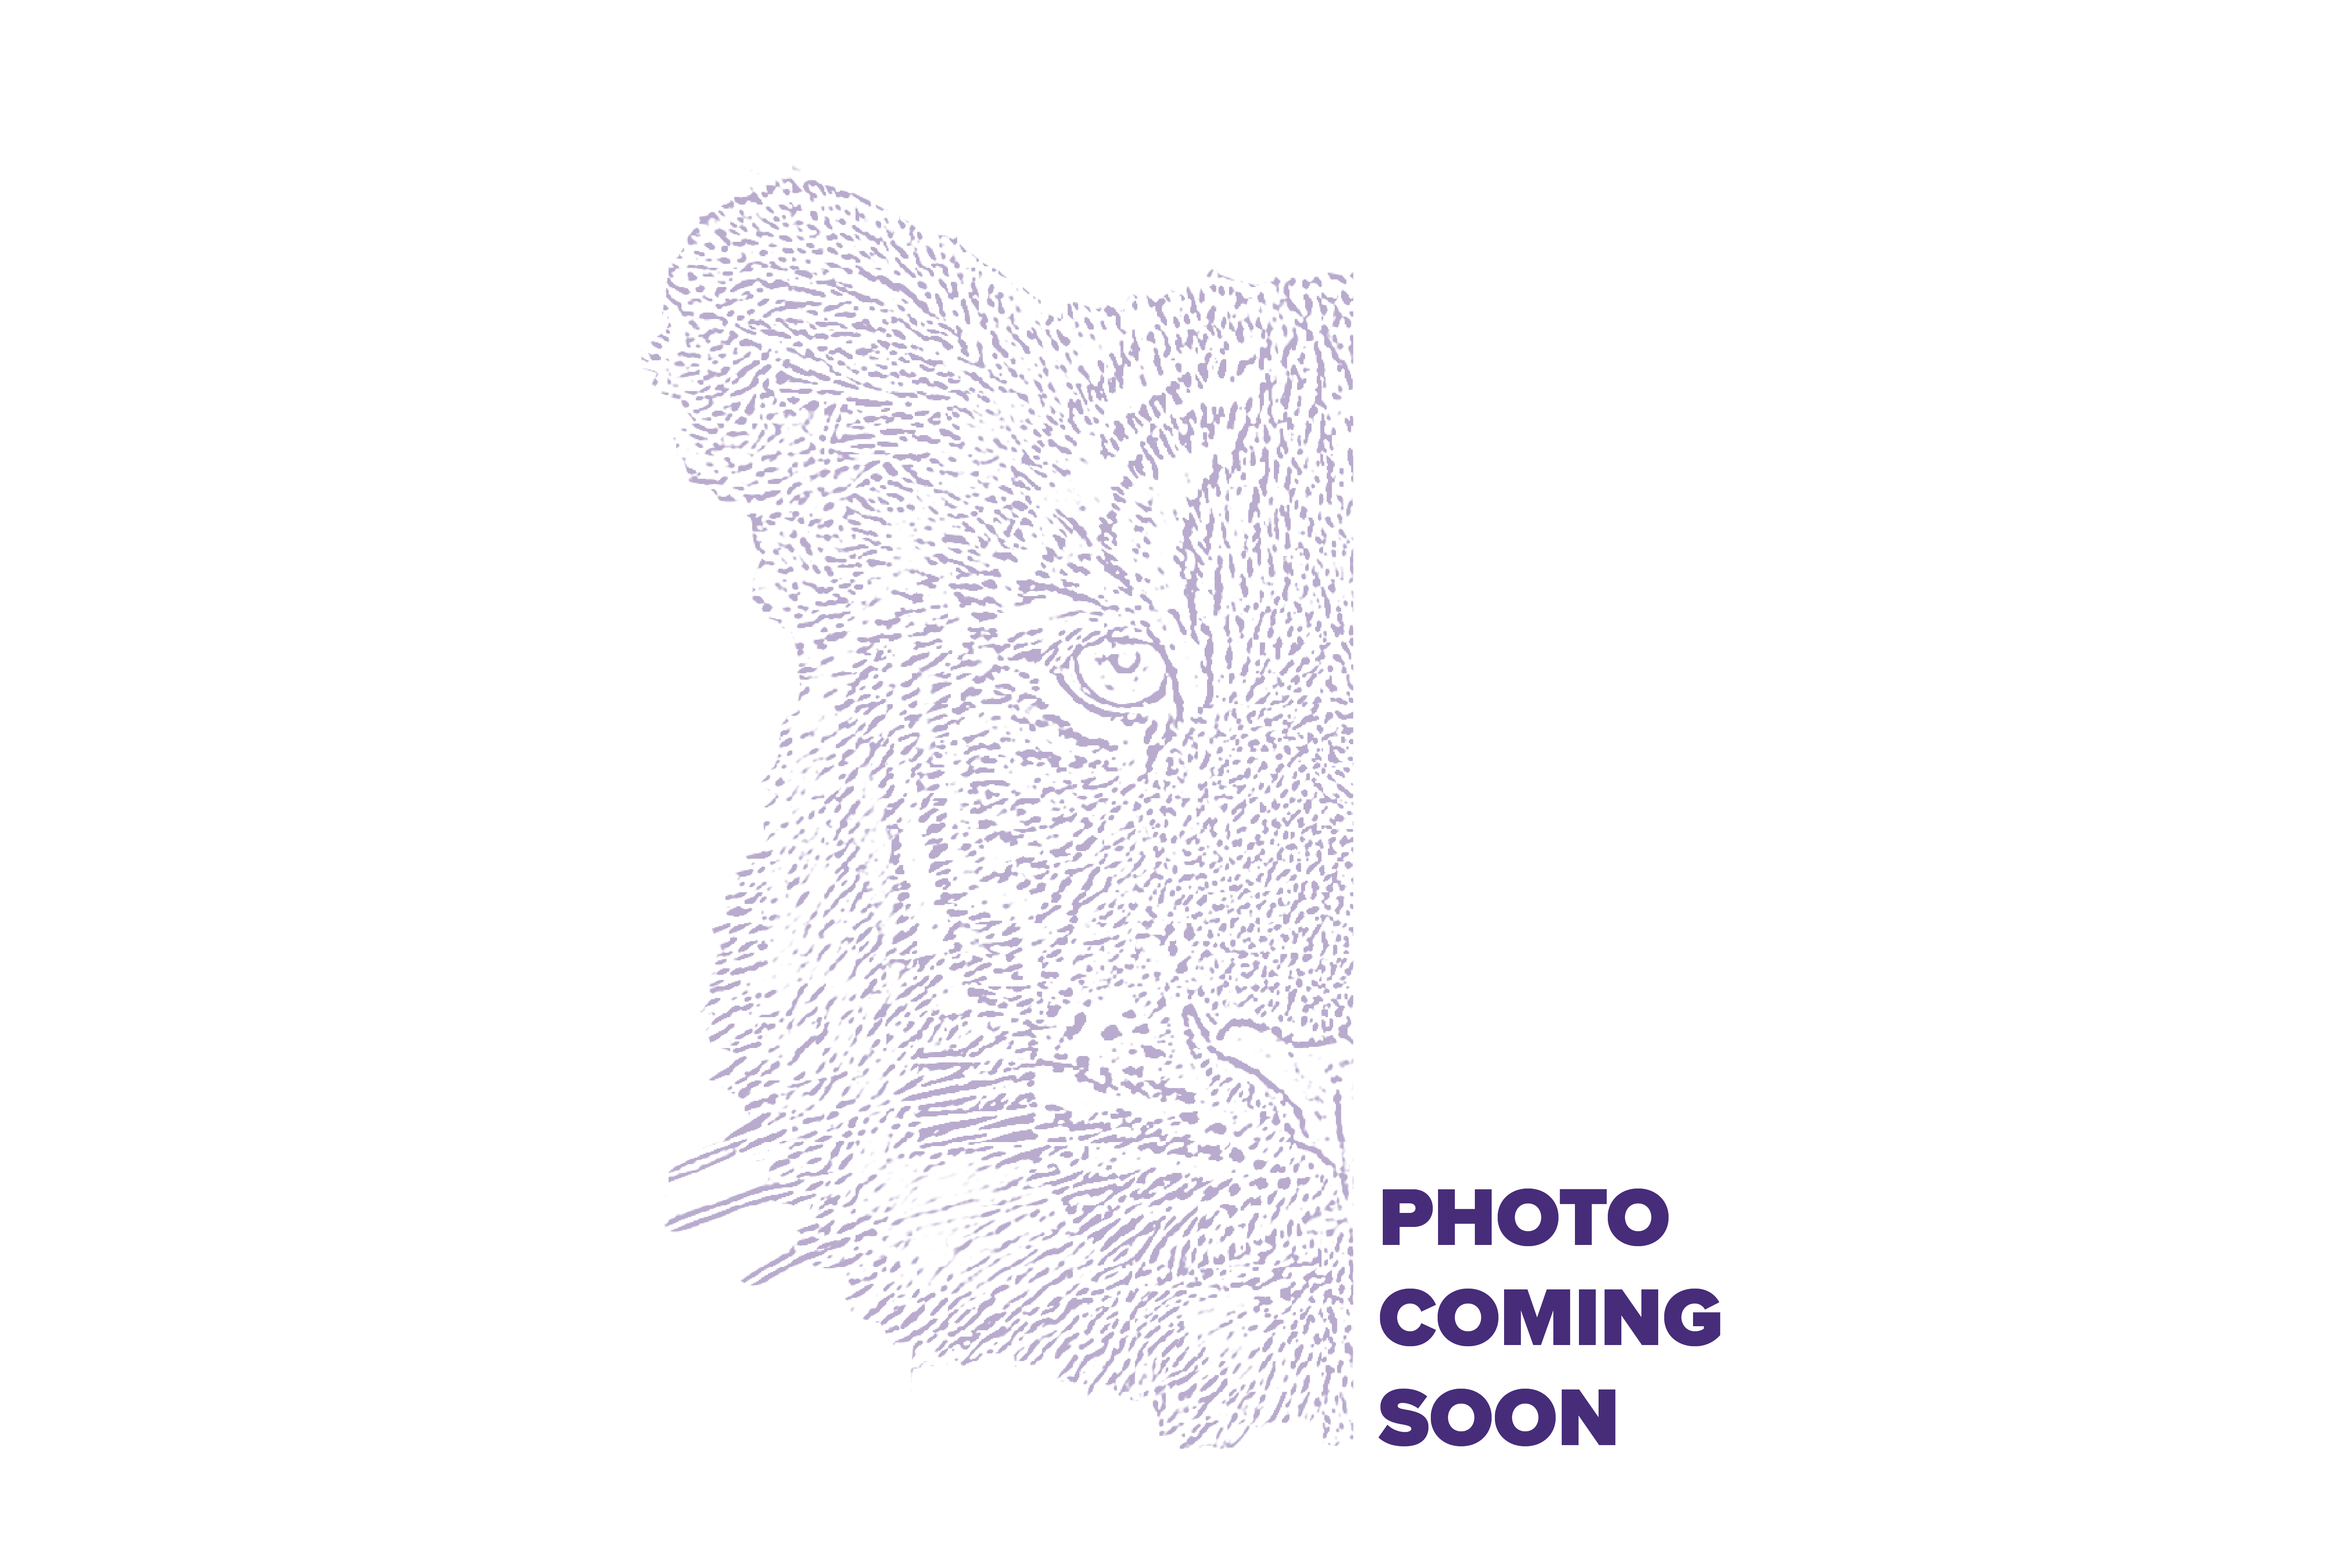 sketch of Mike the Tiger with text photo coming soon